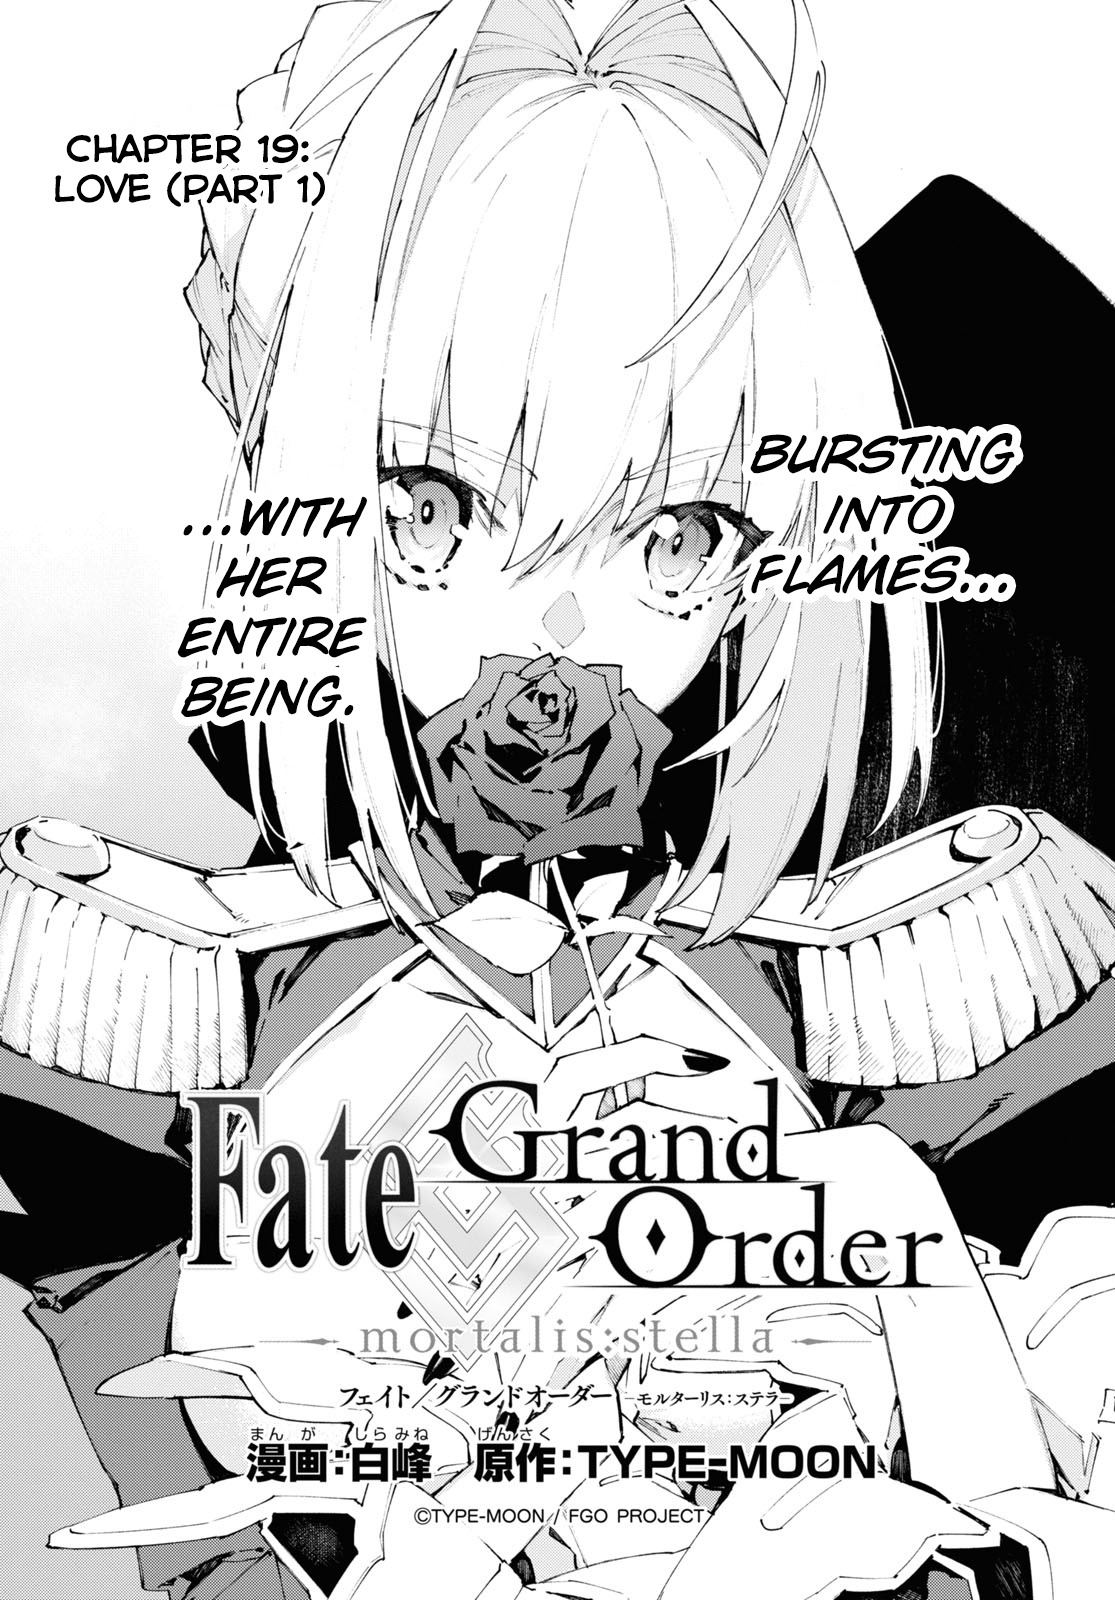 Fate/grand Order -Mortalis:stella- Chapter 19.1: Section 19: Love (First Part) - Picture 1